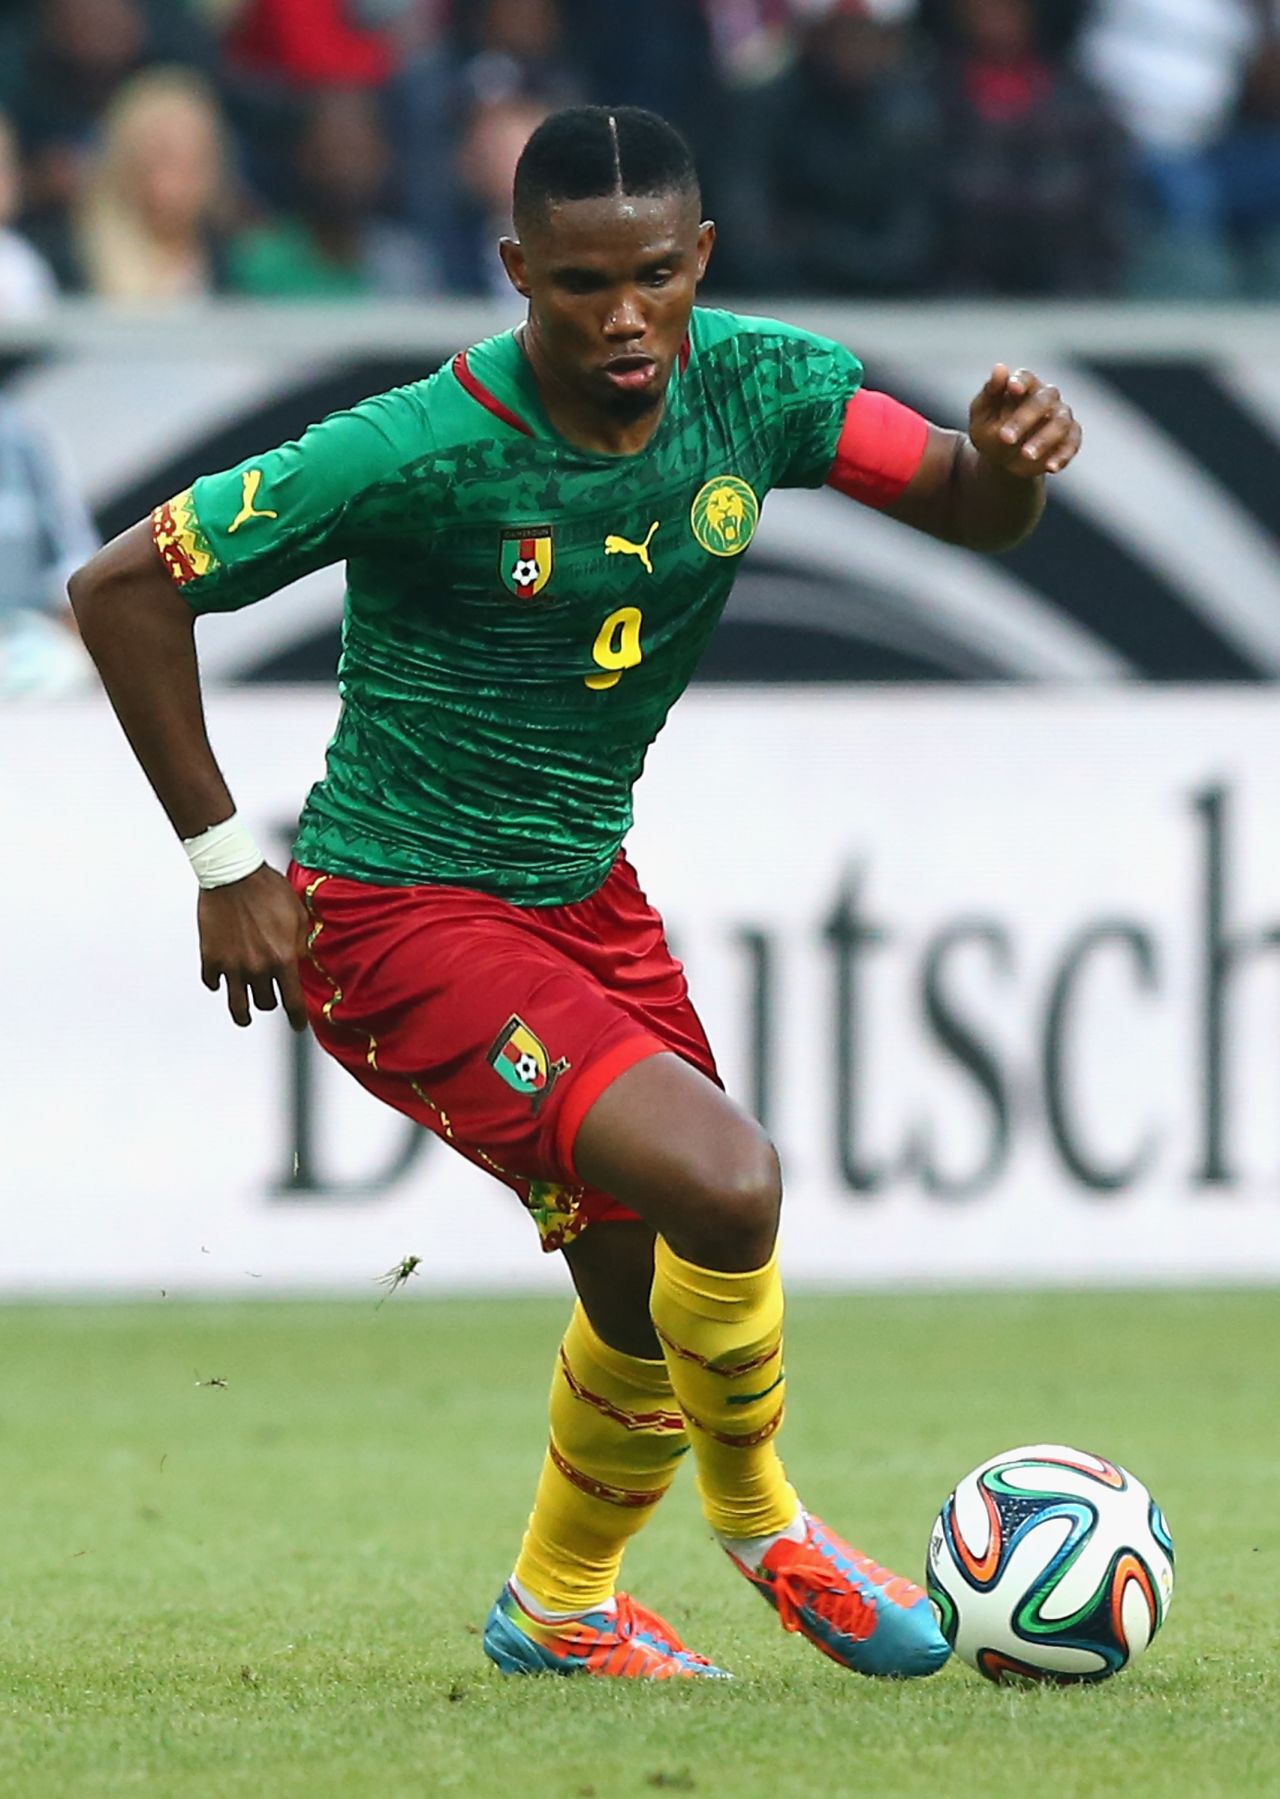 Cameroon's star striker Samuel Eto'o is one of several top African footballers seeking to make amends for past World Cup disappointments at Brazil 2014. 